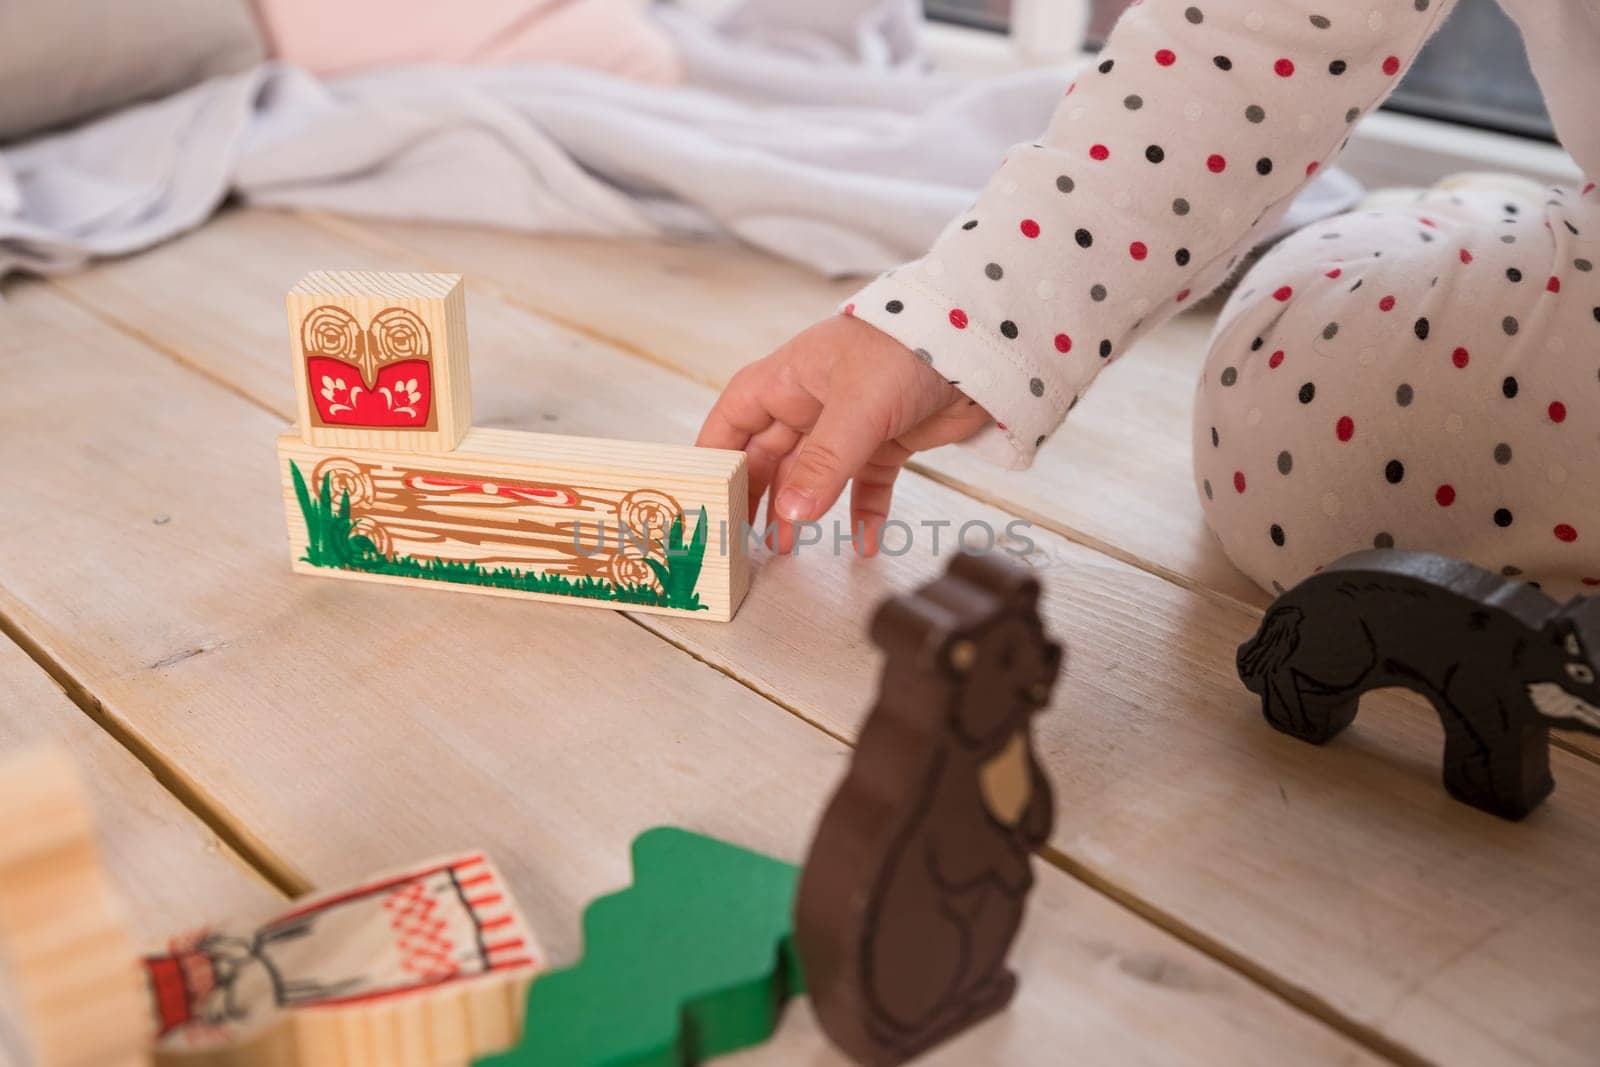 Colorful Animal Theme Urban Toys.child playing with toy ,made of wooden blocks on wooden texture floor indoors in his room. Concept of educational and developing toys for children. mini furniture toys and doll.play room at home or kindergarten by YuliaYaspe1979